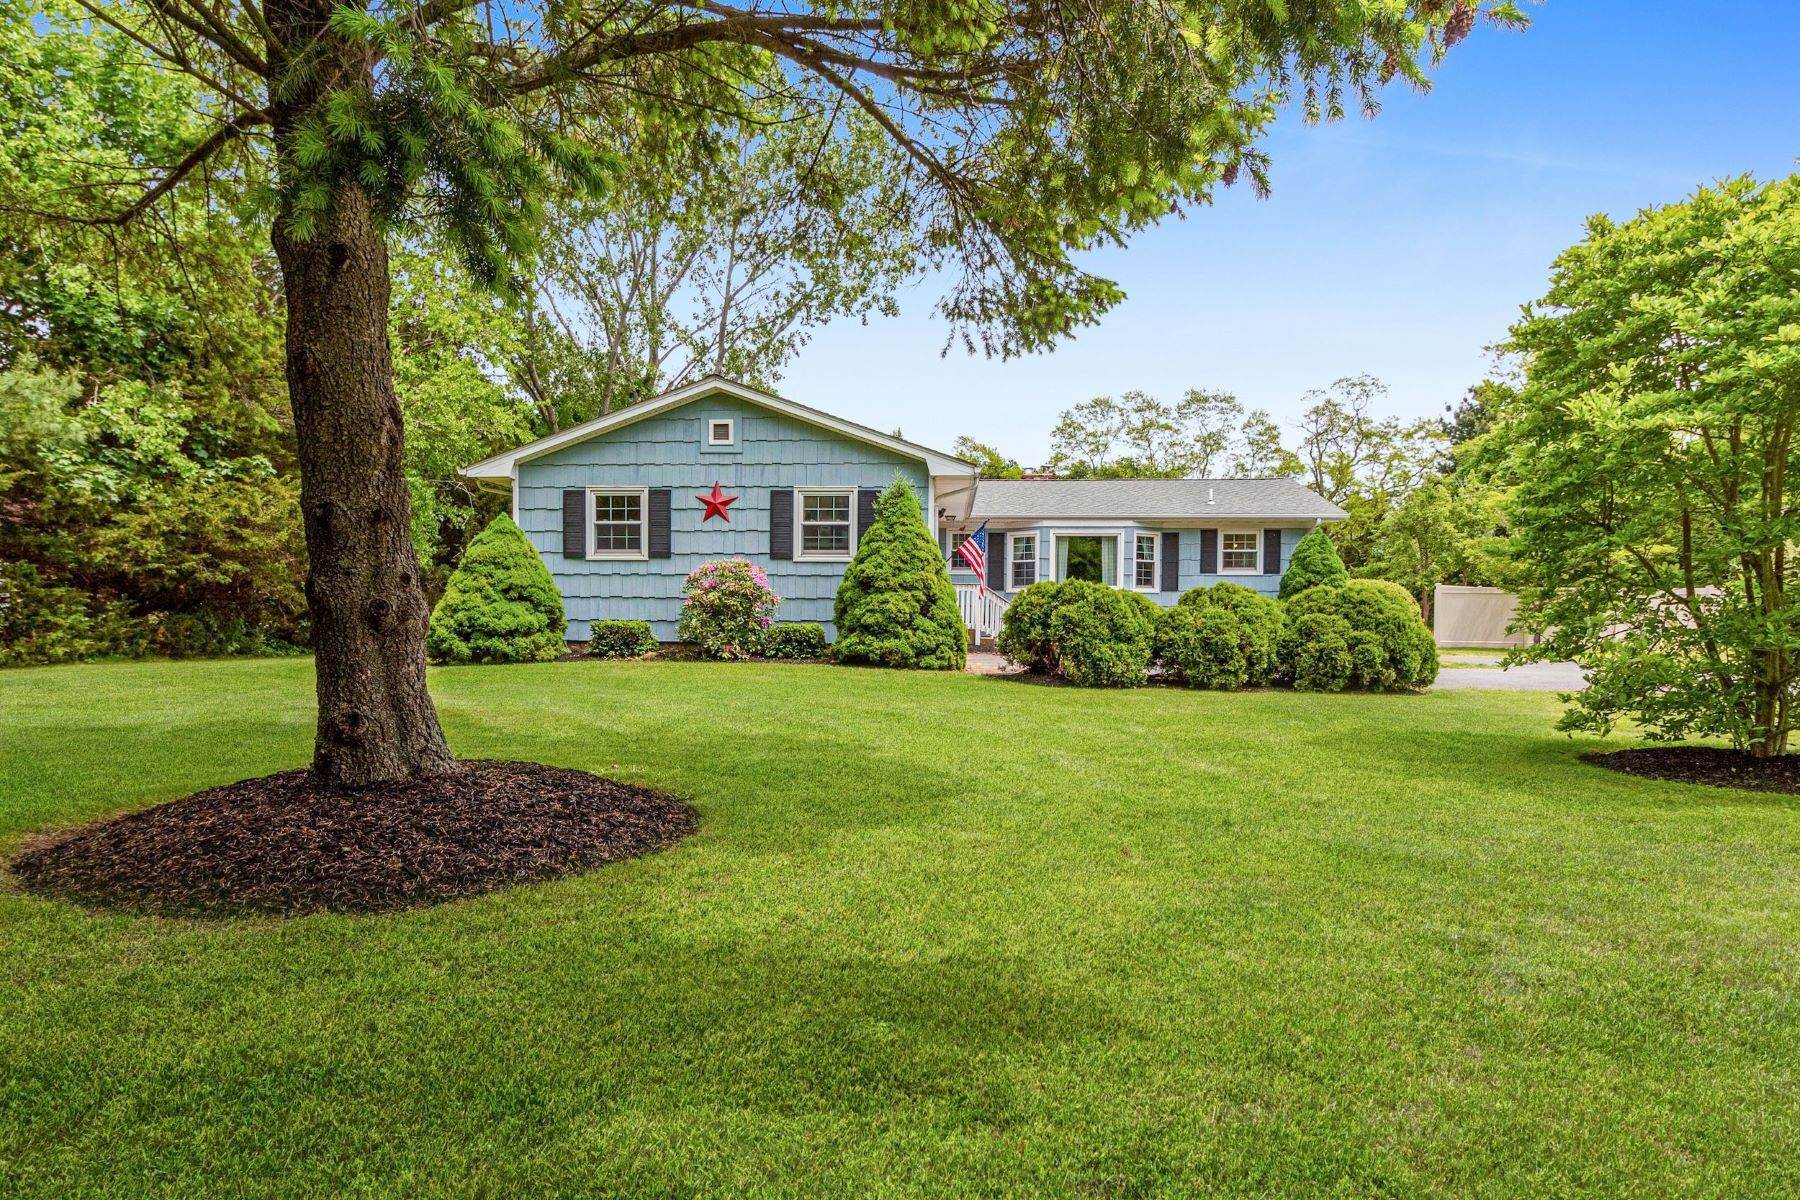 Single Family Homes for Sale at 240 Silver Colt Road, Cutchogue, NY 11935 240 Silver Colt Road, Cutchogue, NY 11935, Cutchogue, New York 11935 United States